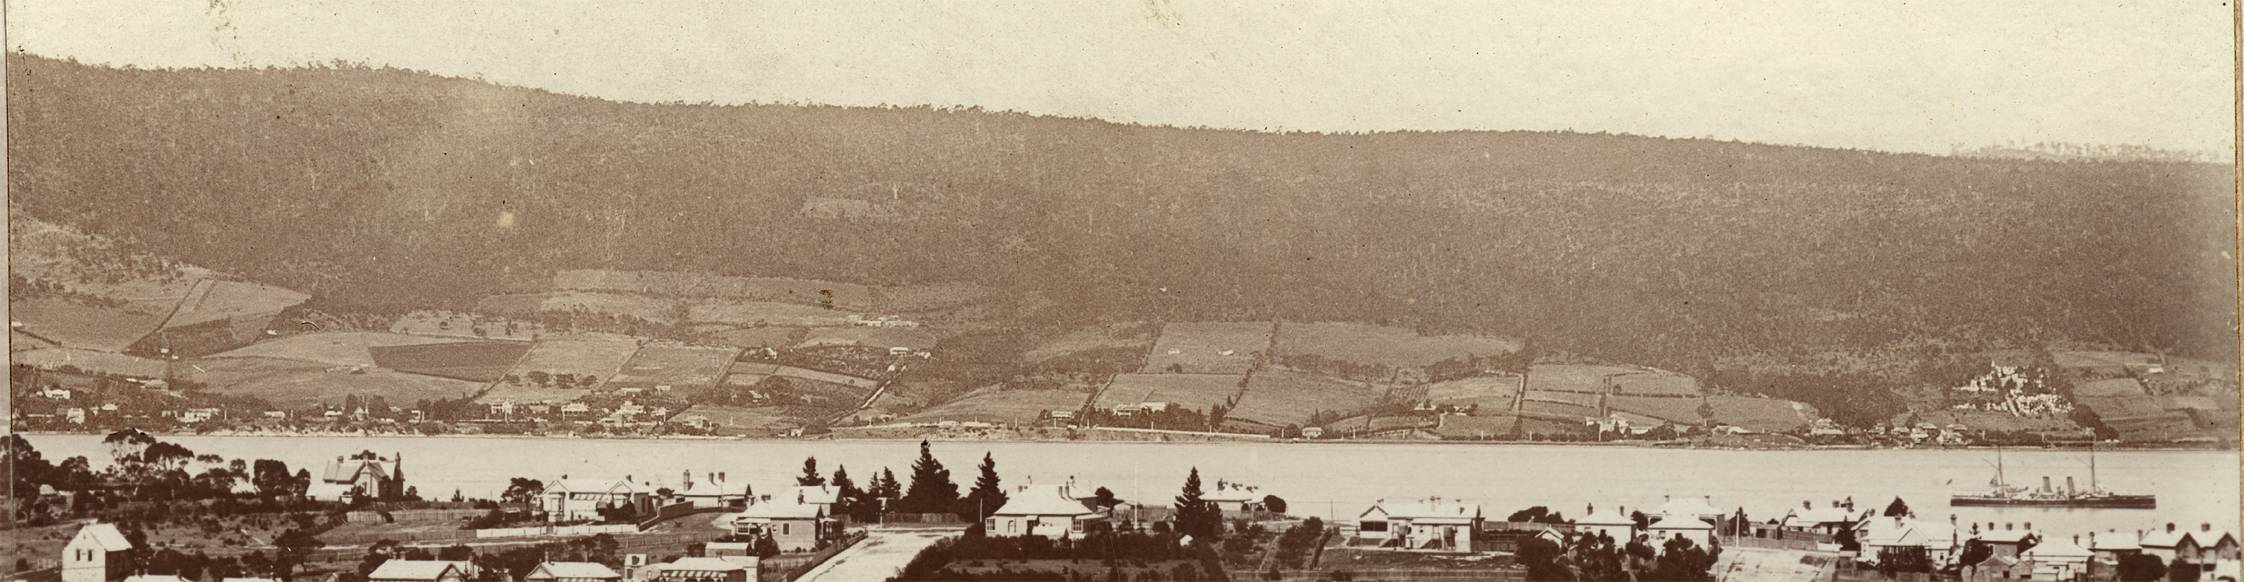 A detail of "Bellerive Panorama from Mornington Hill" taken during the visit by the Duke and Duchess of York July 1901 Photo courtesy Tasmanian Museum and Art Gallery